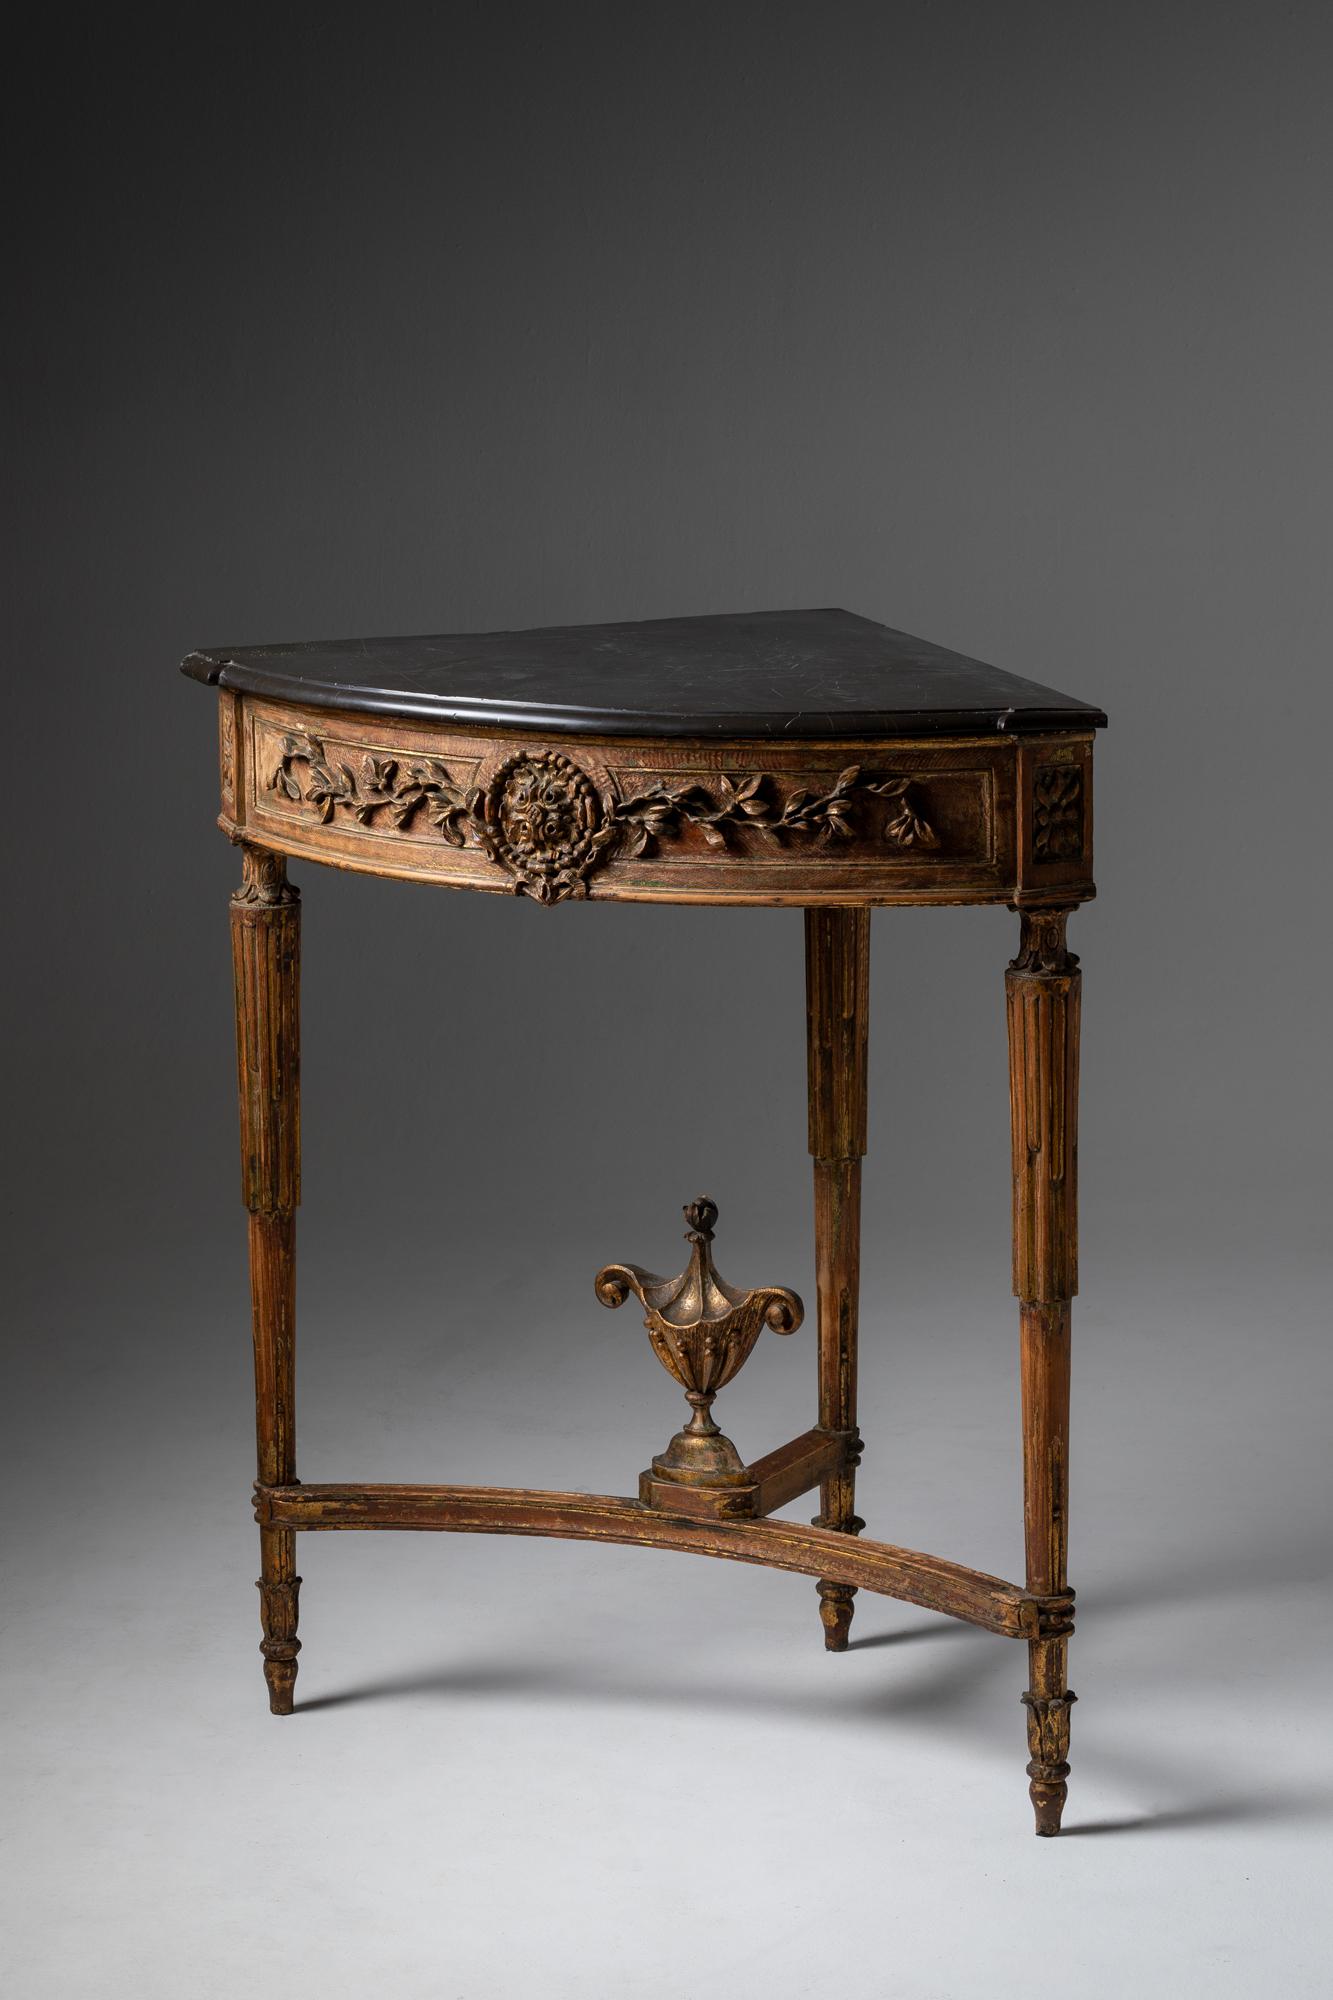 Pair of Louis XVI style corner tables.
Carved wood, with traces of ancient gold and black marble tops. 
Portugal 19th century.
Made by the french interior design, Lucien Donnat, who lived in Portugal since he was a child.